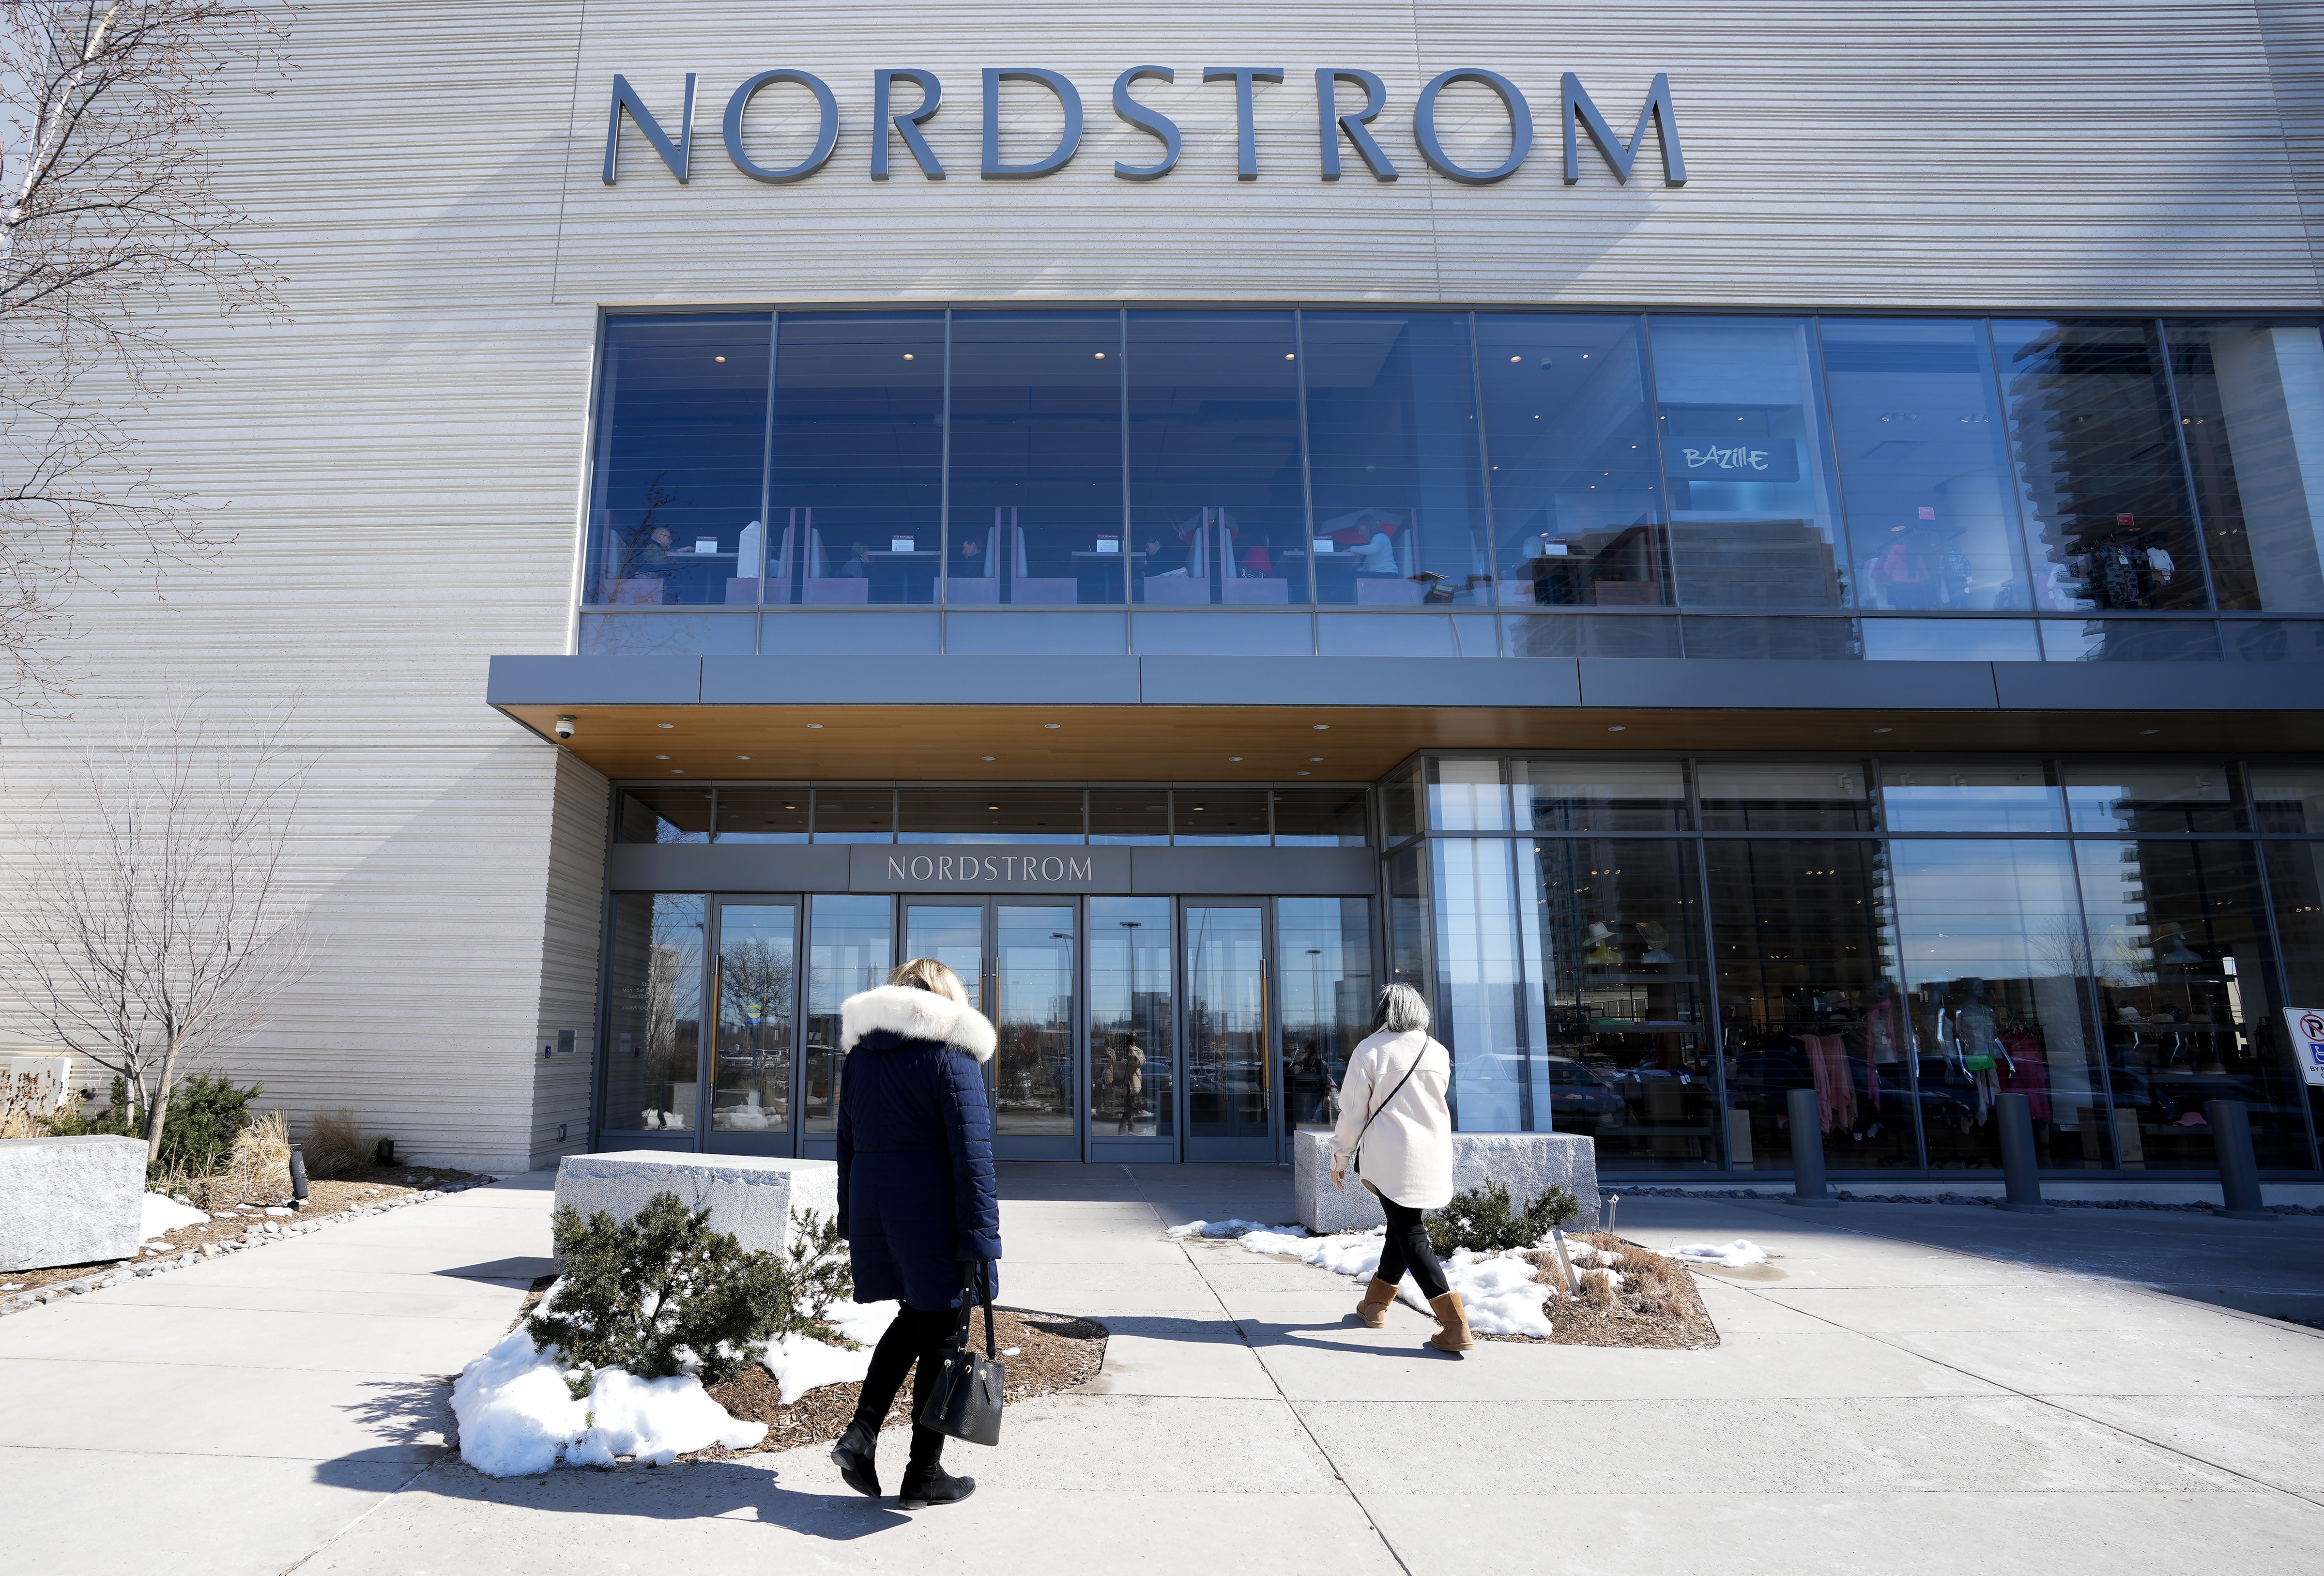 Nordstrom bets on a slow, cautious entry into Canada - The Globe and Mail